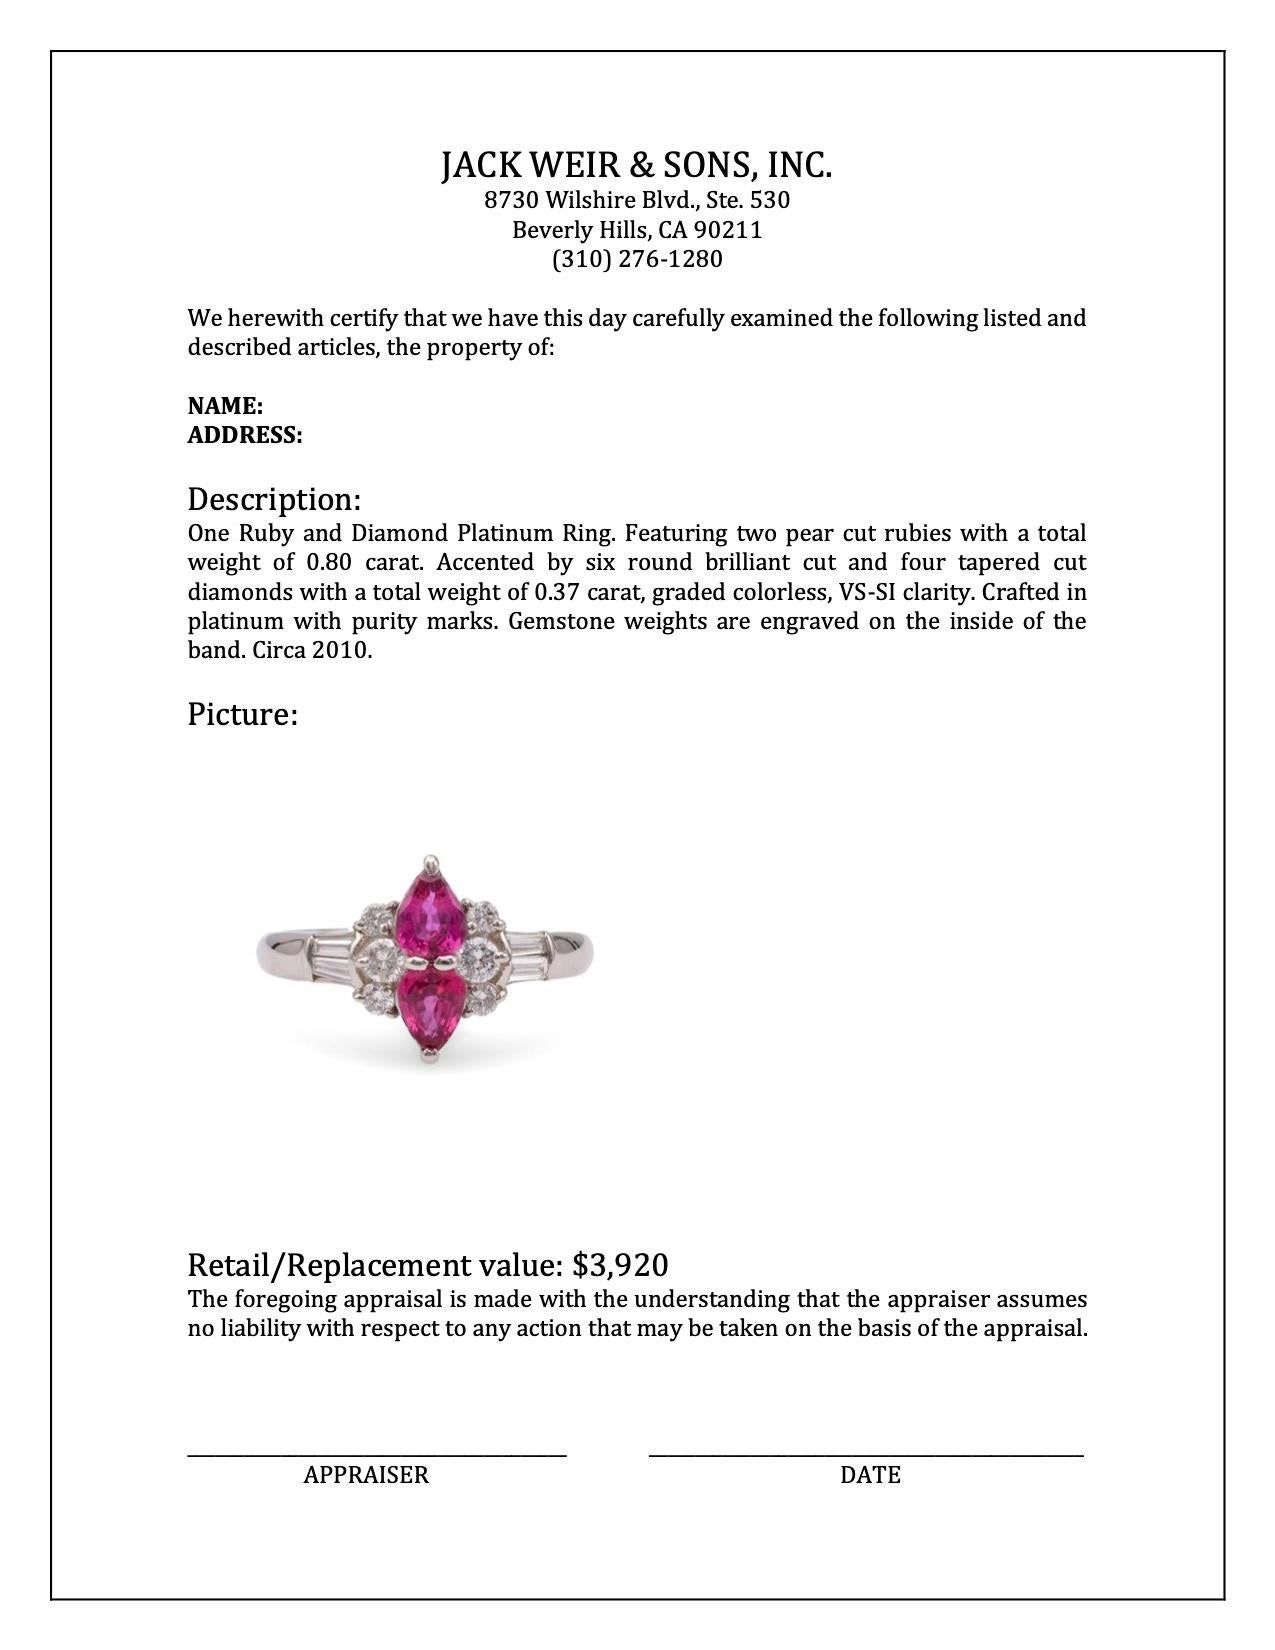 Women's or Men's Ruby and Diamond Platinum Ring For Sale